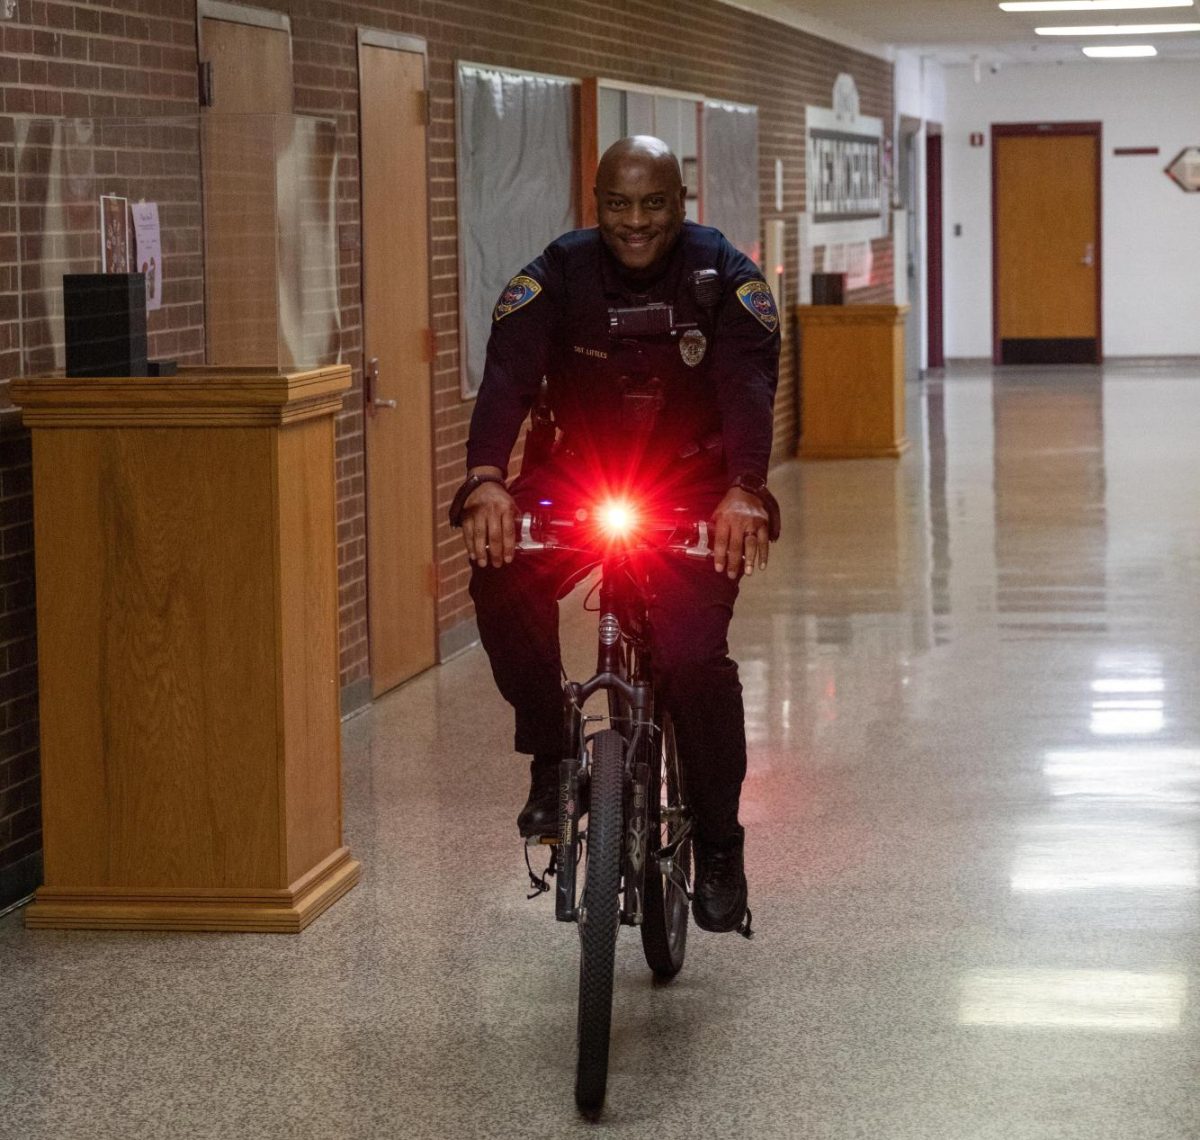 Sergeant Littles riding his bicycle through the hallways.